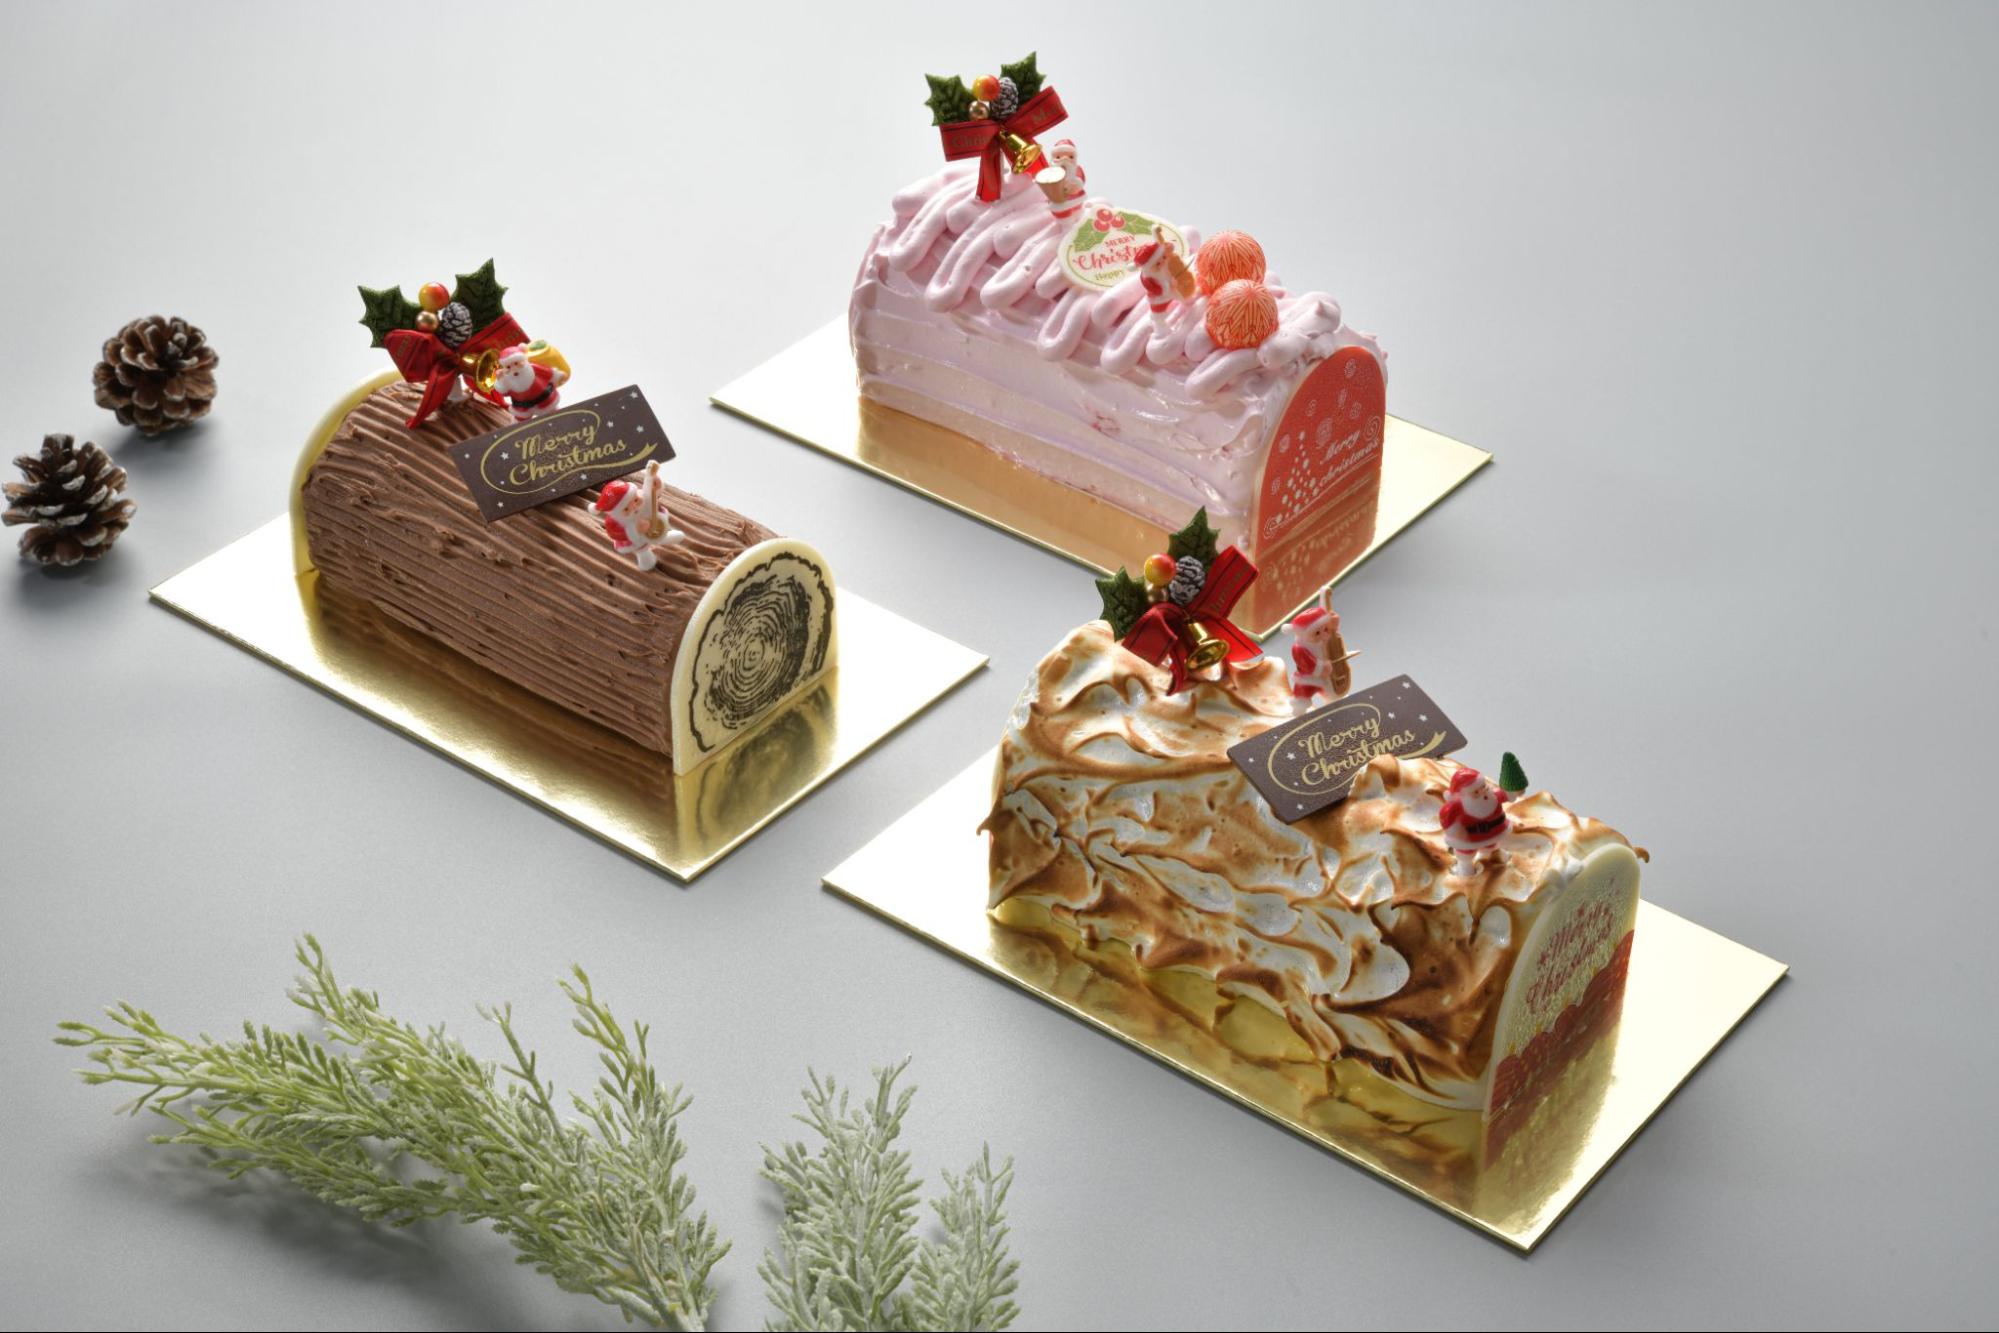 10 Best Log Cakes For Christmas With Up To 25% Off